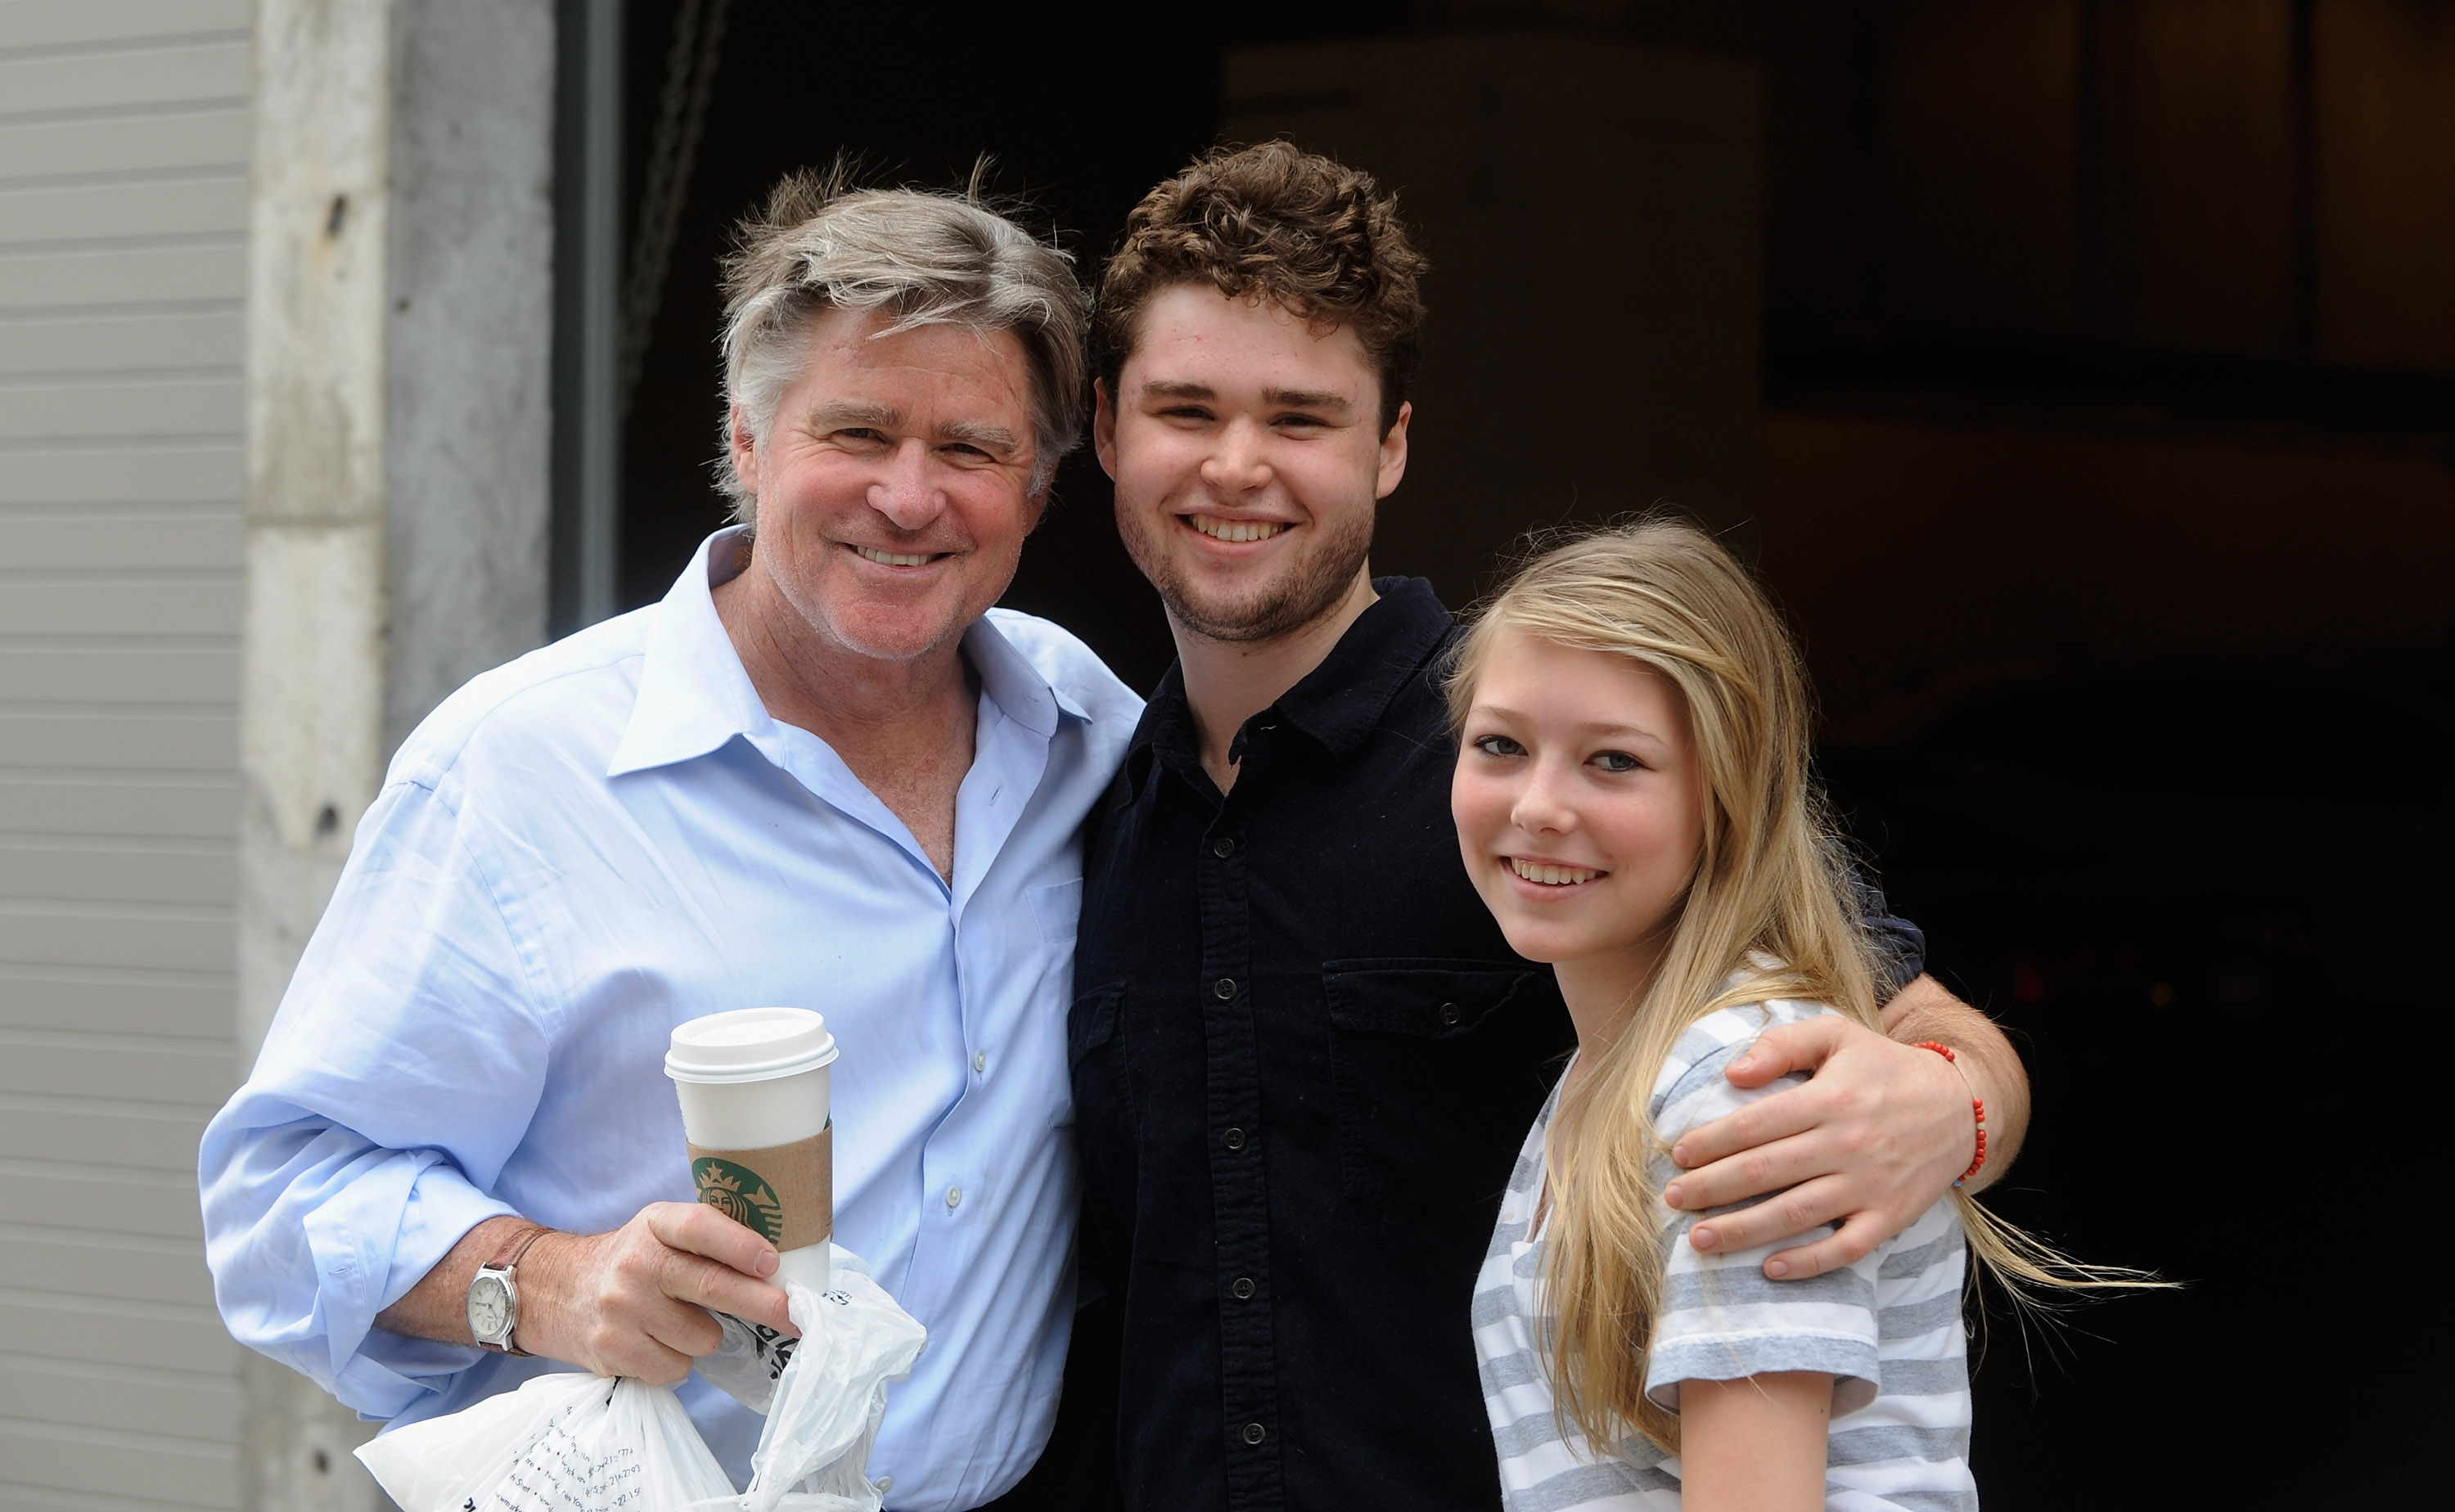 Treat Williams and his children, Gil Williams and Ellie Williams on May 14, 2012 in New York City | Source: Getty Images